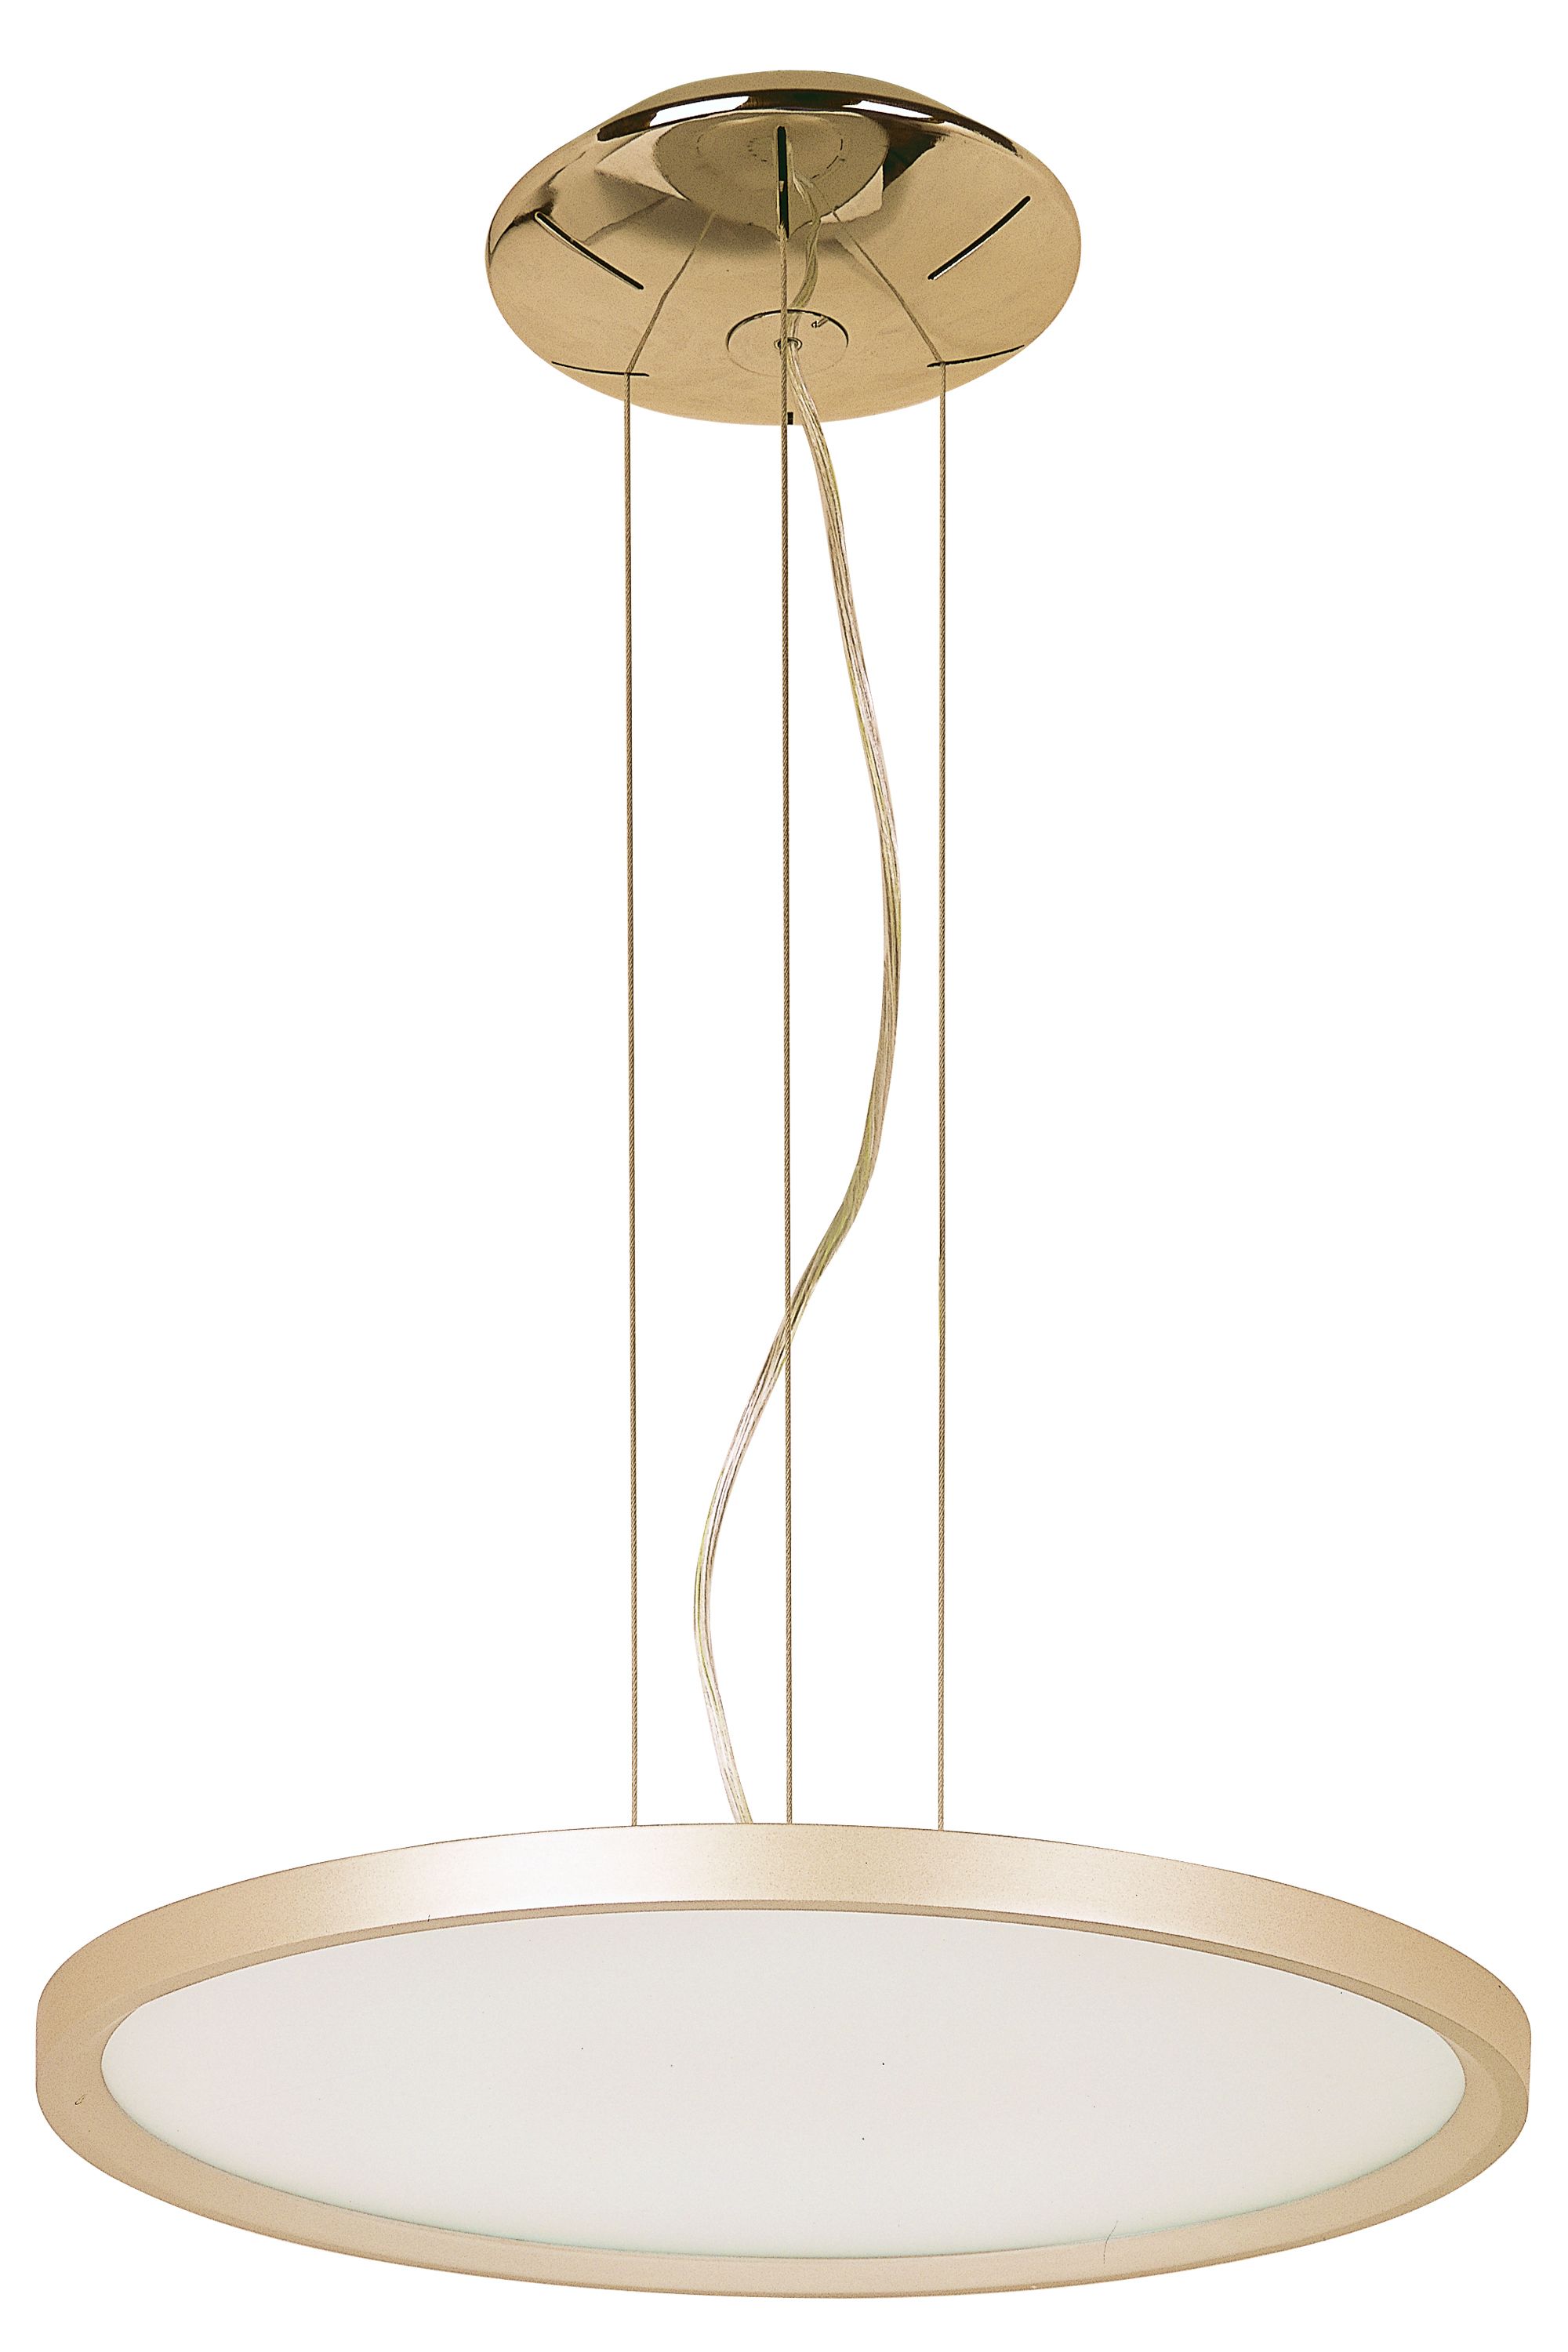 ET2 Lighting-E22445-11MS-Moonbeam-LED Pendant in Transitional style-19.75 Inches wide by 2.75 inches high   Metallic Silver Finish with Matte White Glass